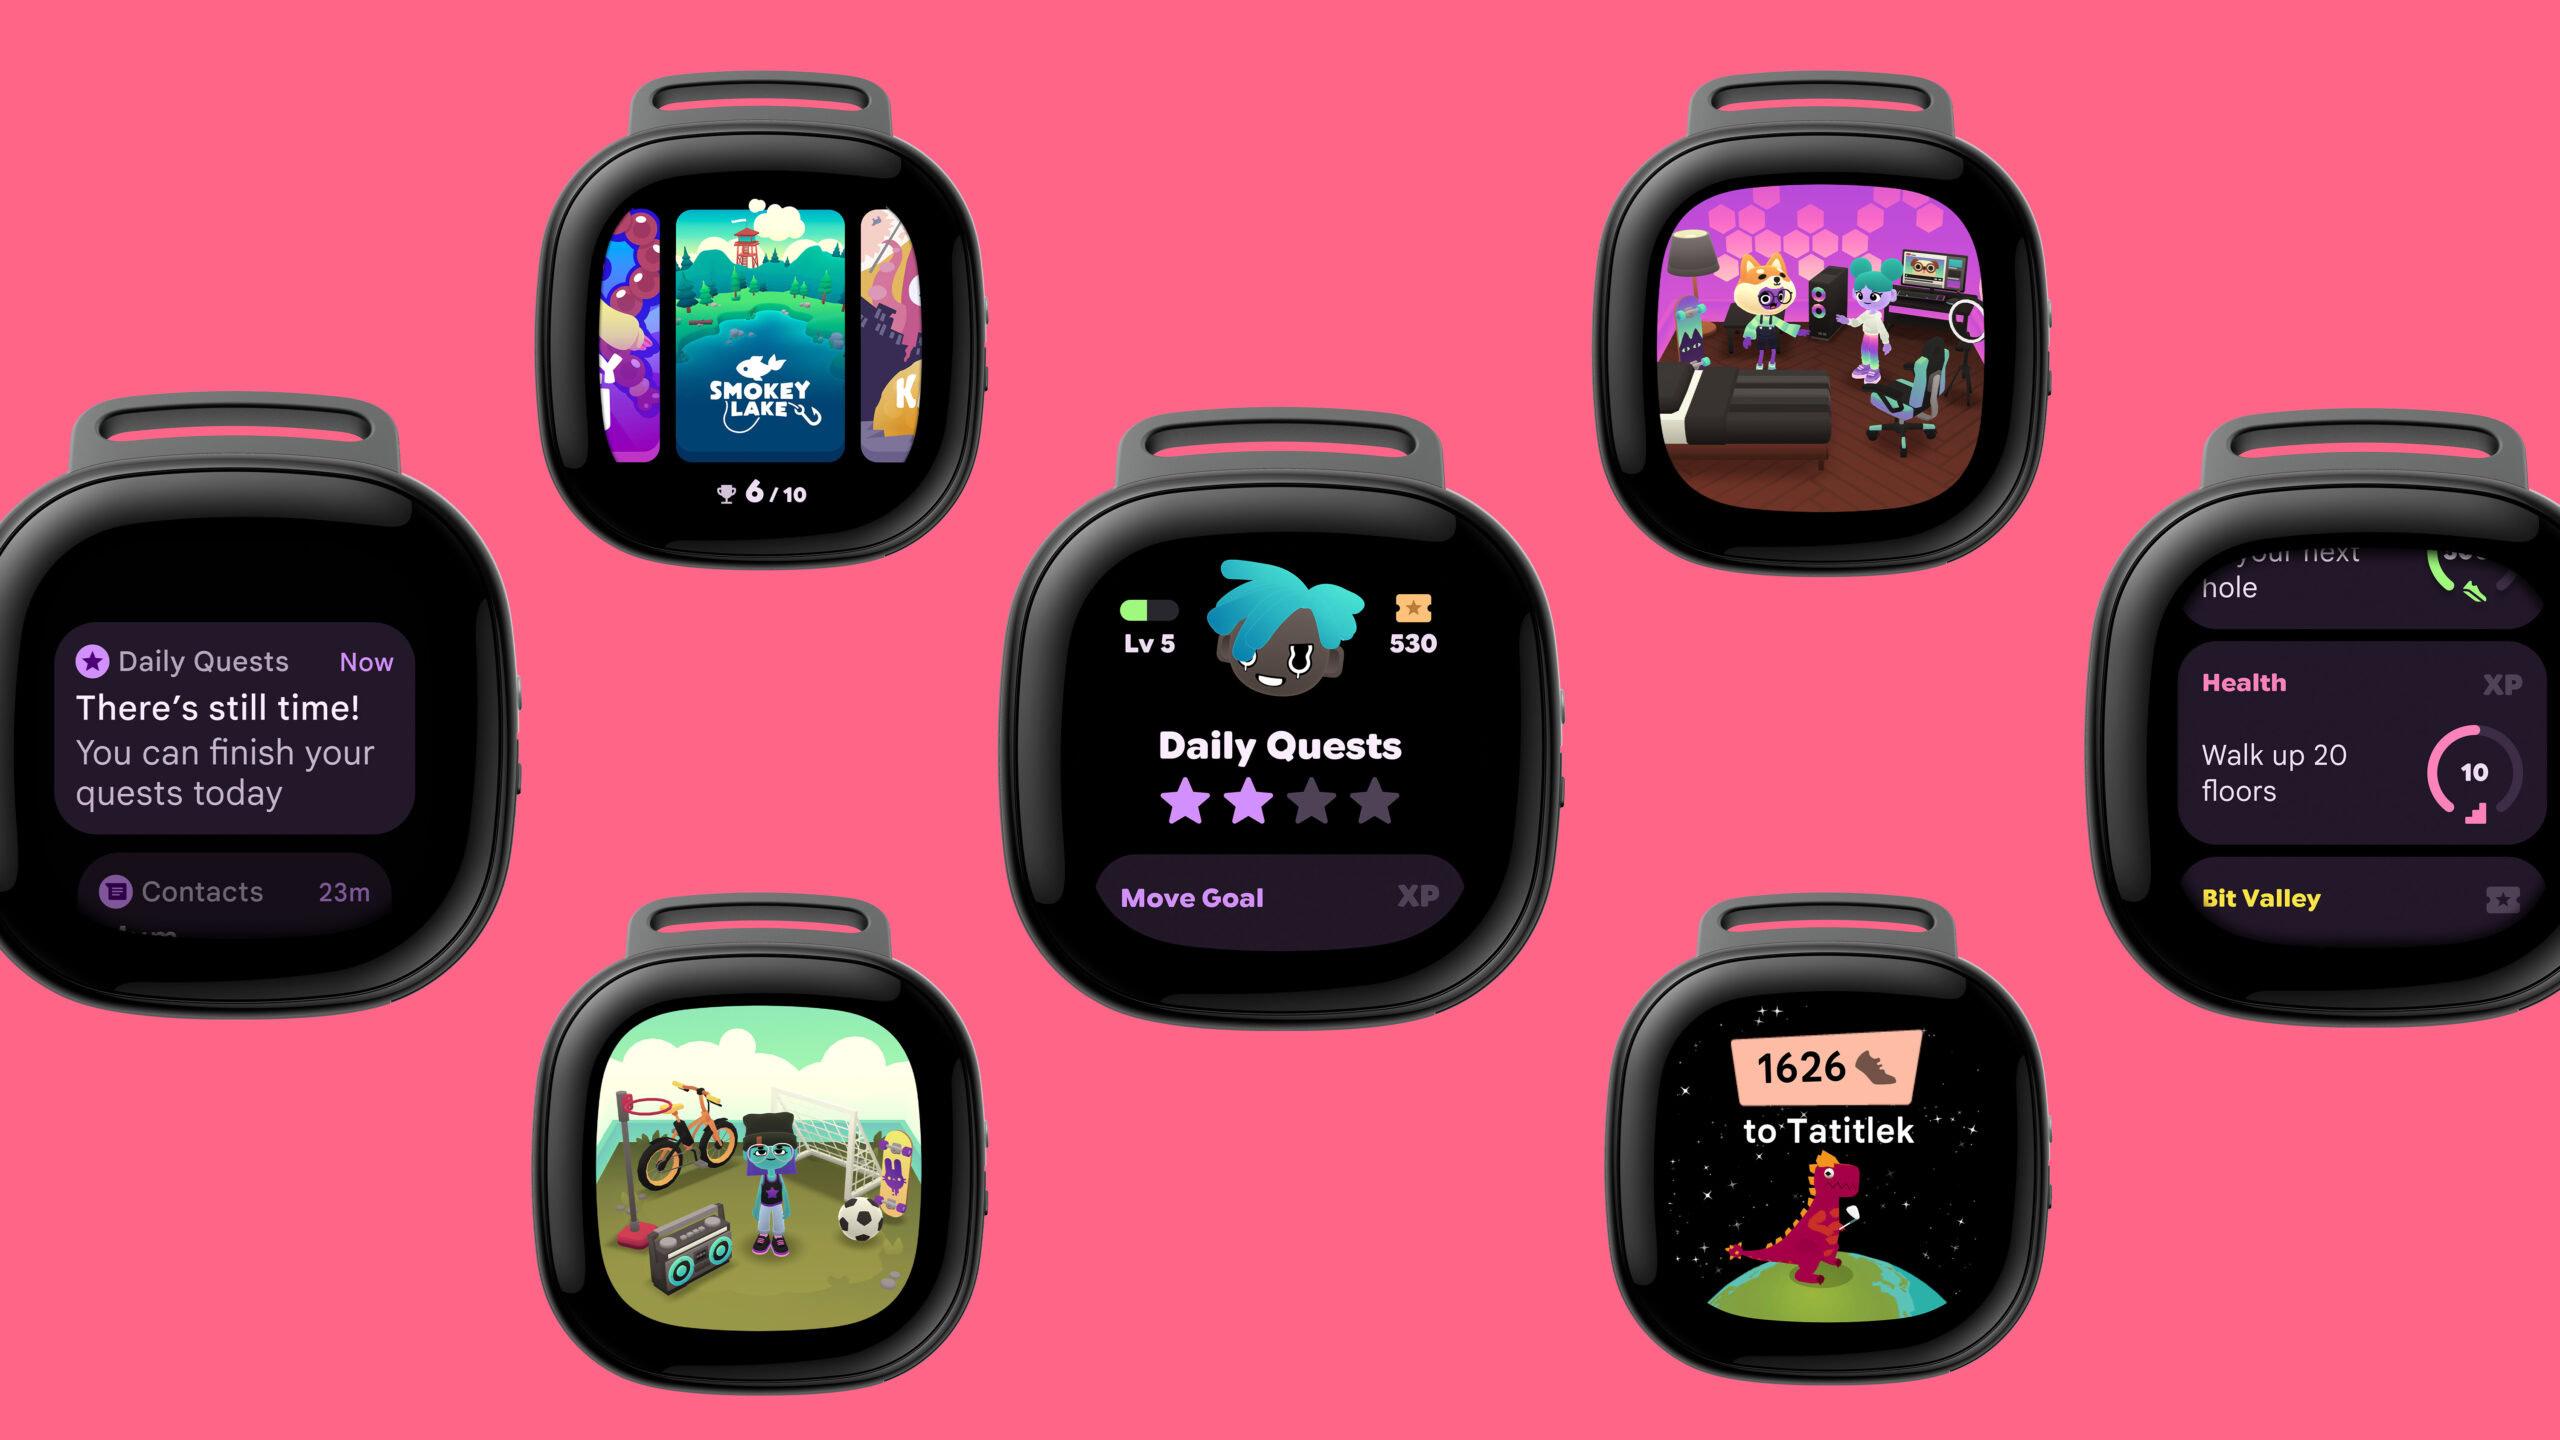 The Fitbit Ace LTE motivates users with arcade games, virtual friends called eejies, and other animated goal markers.